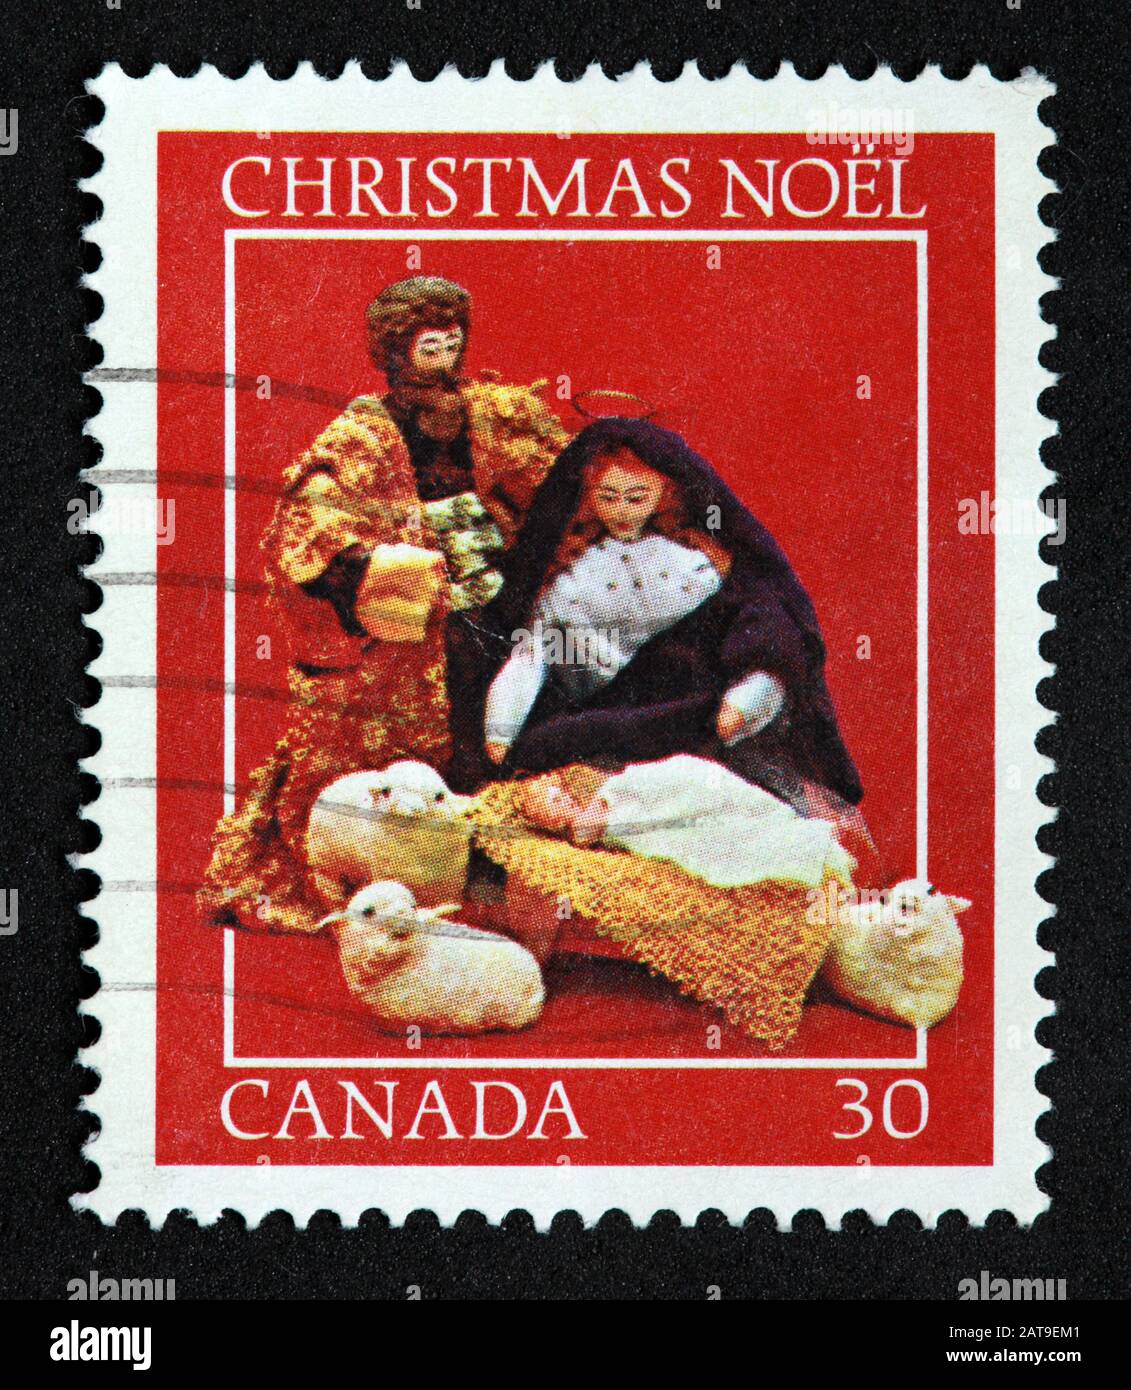 Timbro canadese, Canada Stamp, Canada Post, usato Stamp, Canada , 30c, 30cents, Noel, rosso, Natale Foto Stock